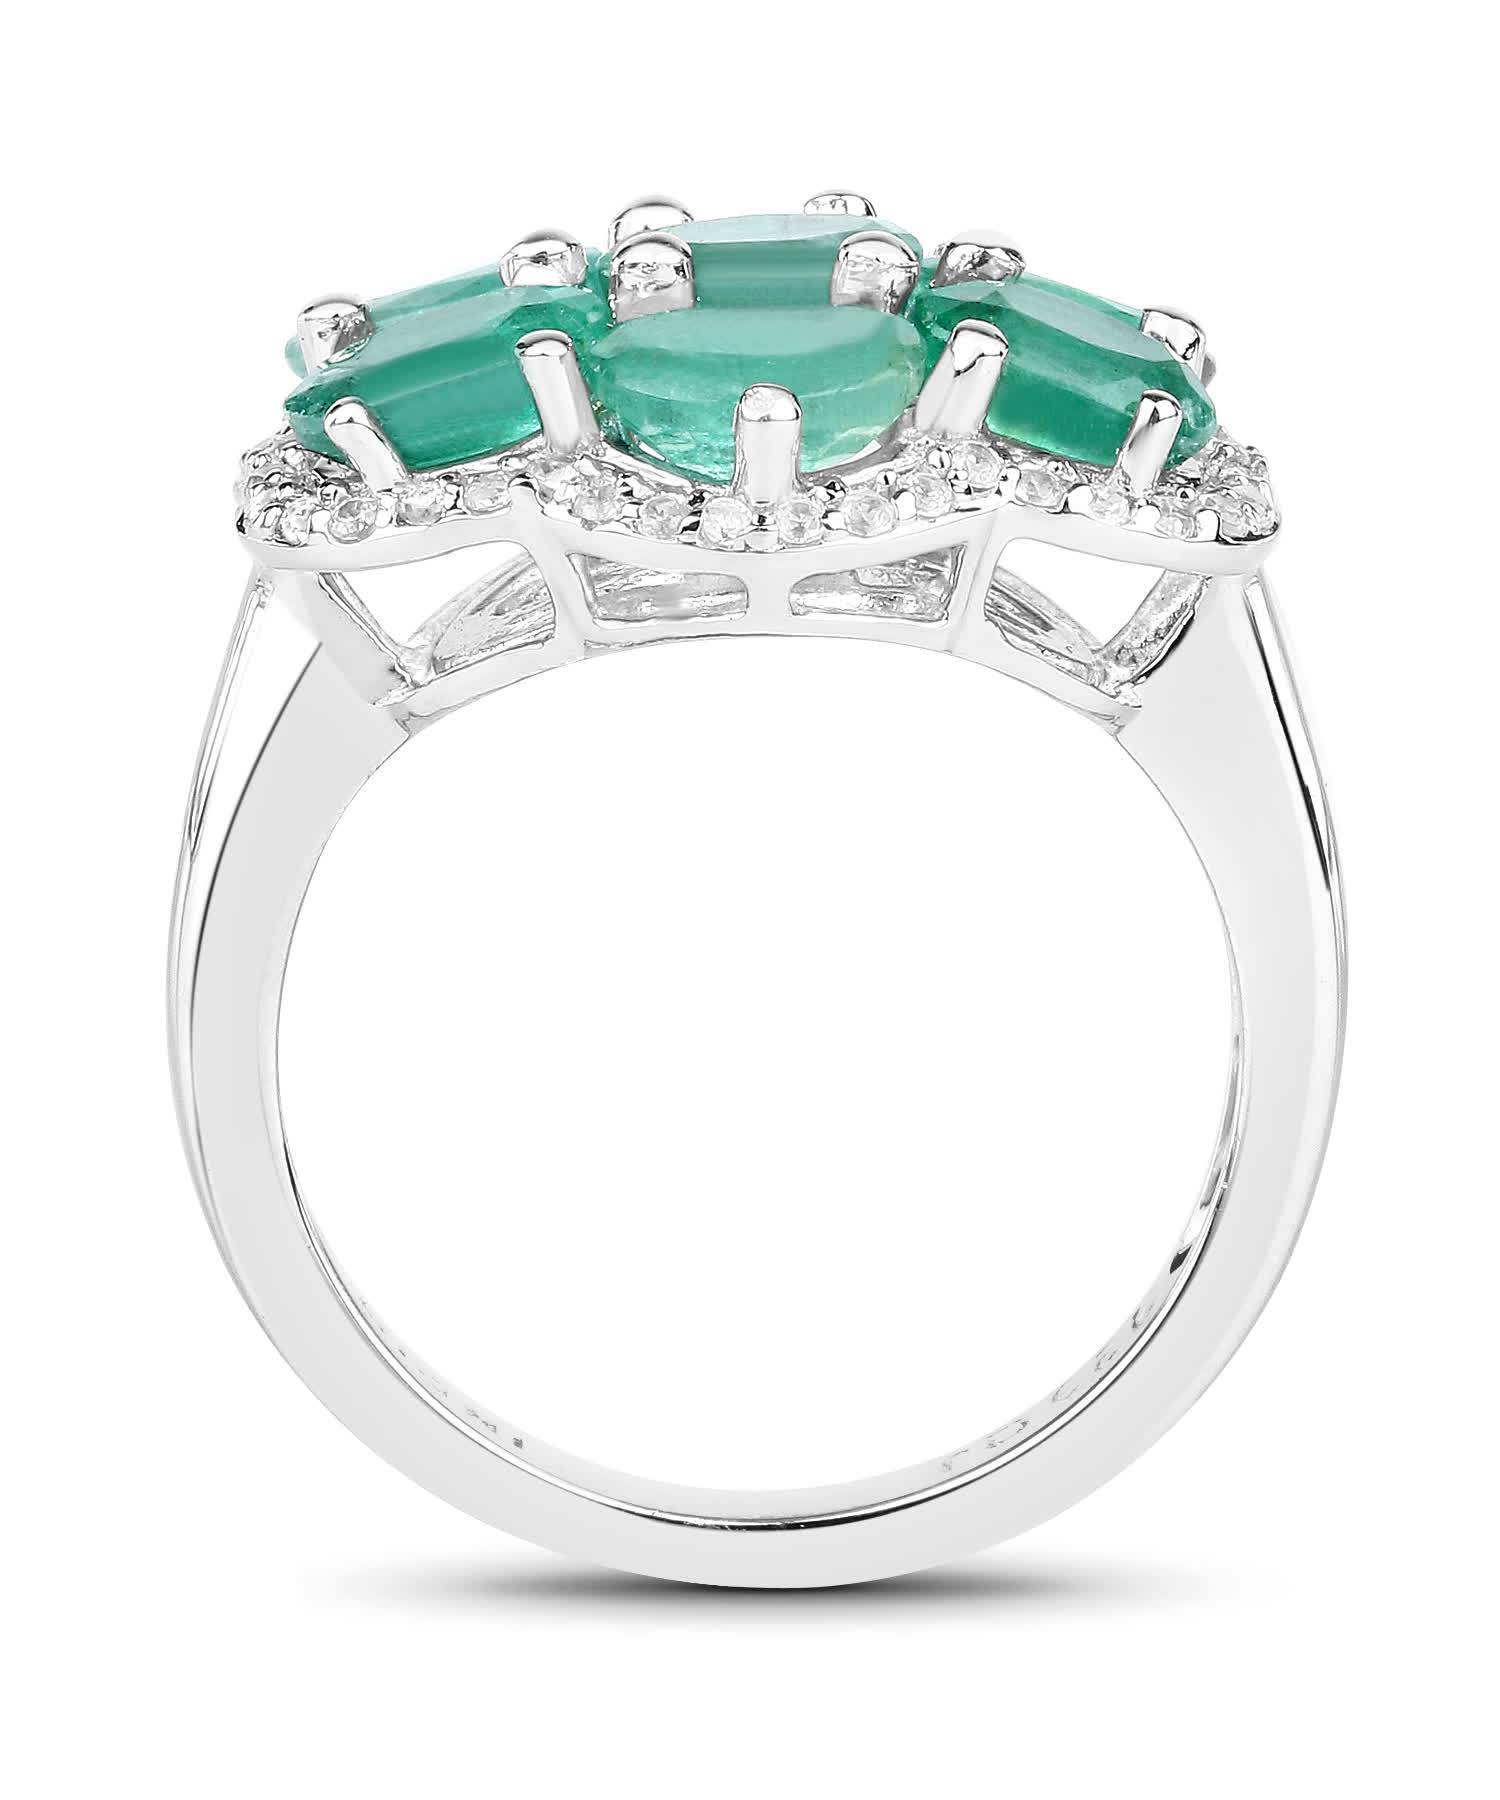 3.33ctw Natural Emerald and Zircon Rhodium Plated 925 Sterling Silver Fashion Ring View 2